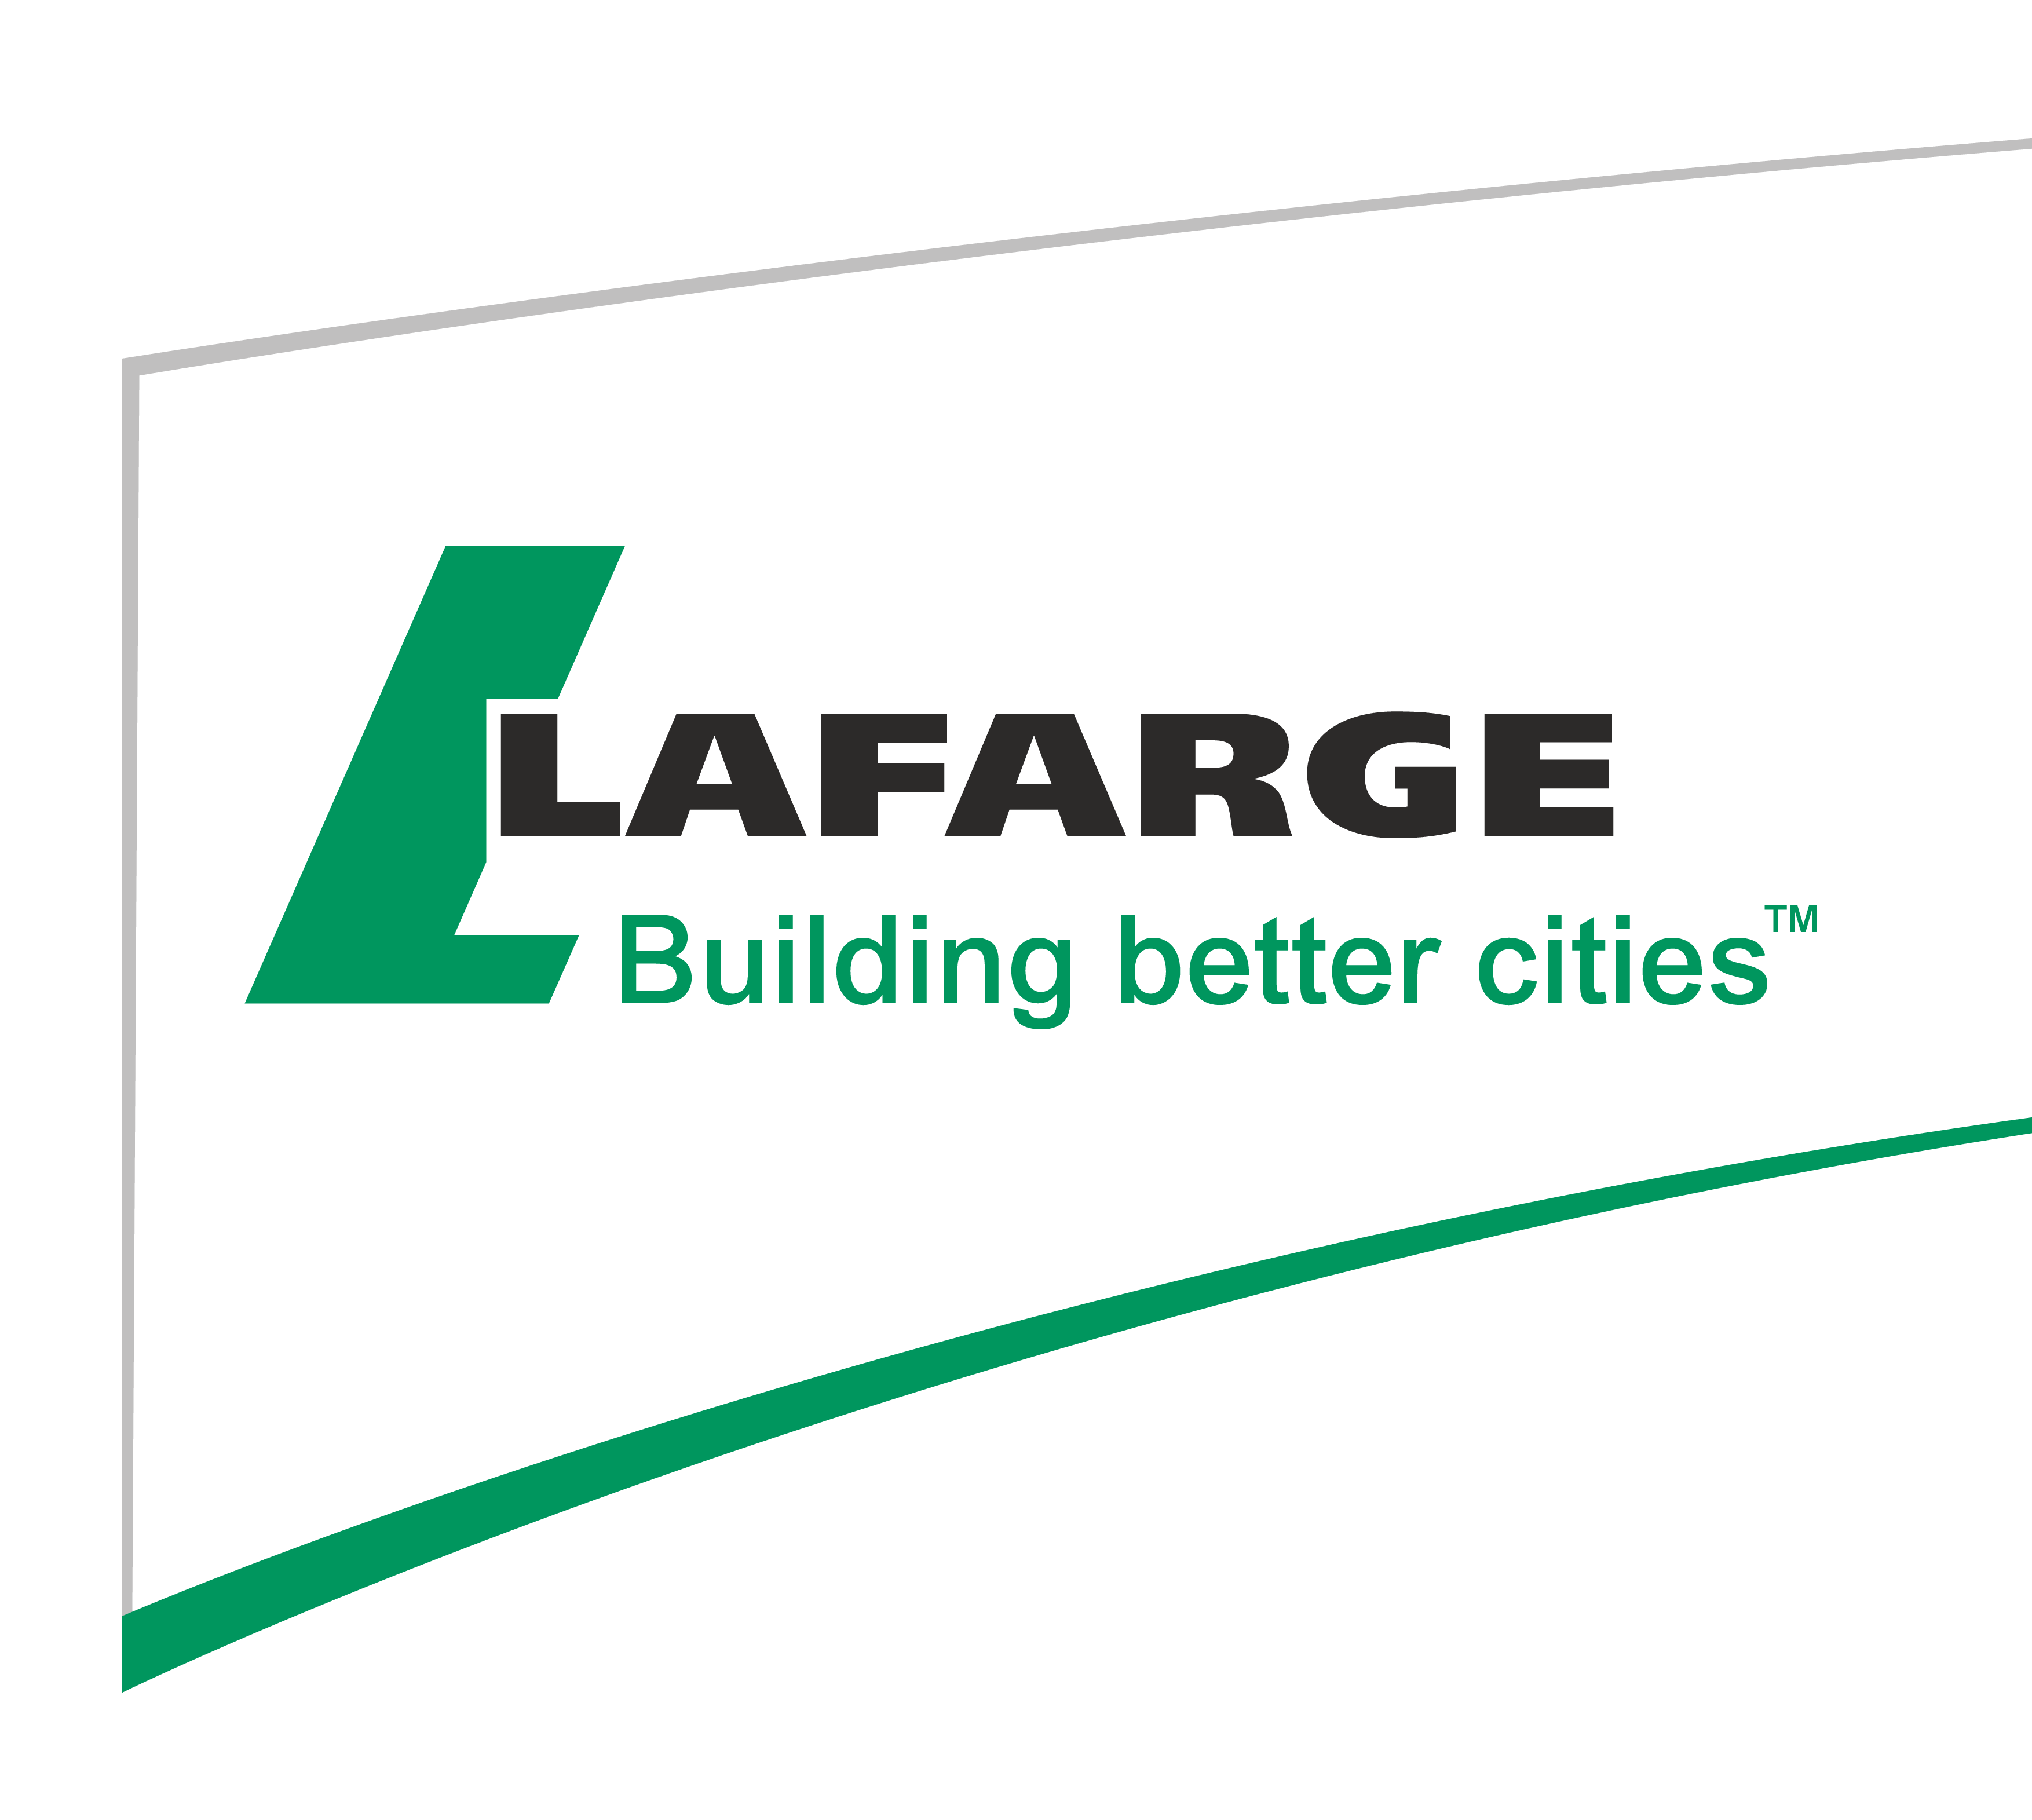  Acceleration at the Heart of Lafarge’s 15th Annual Sustainability Report Image.